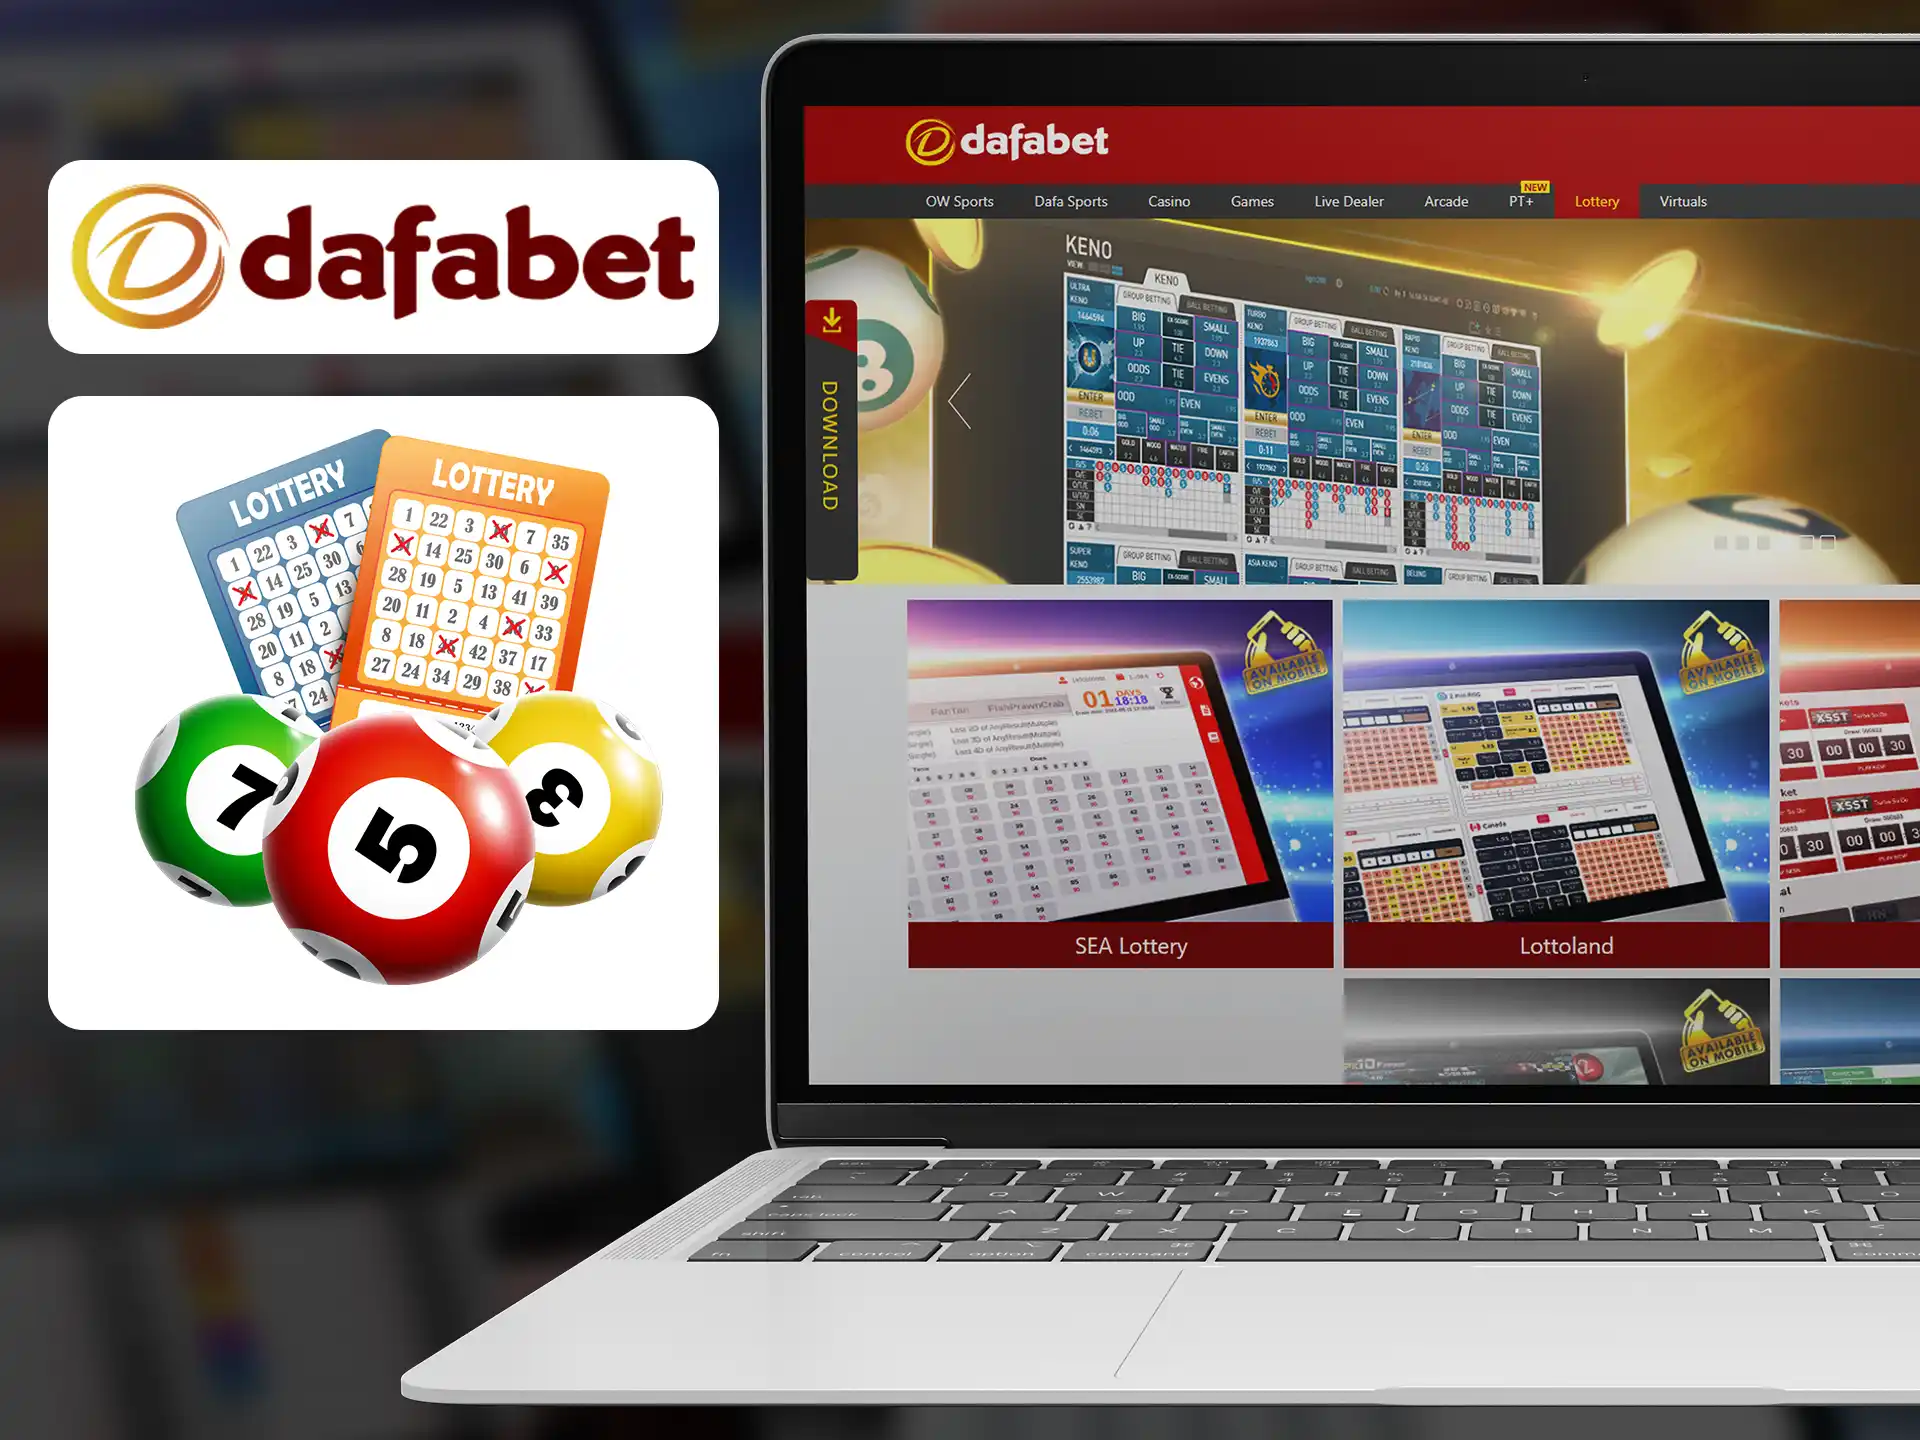 Catch jackpot prize by playing Dafabet lotteries.